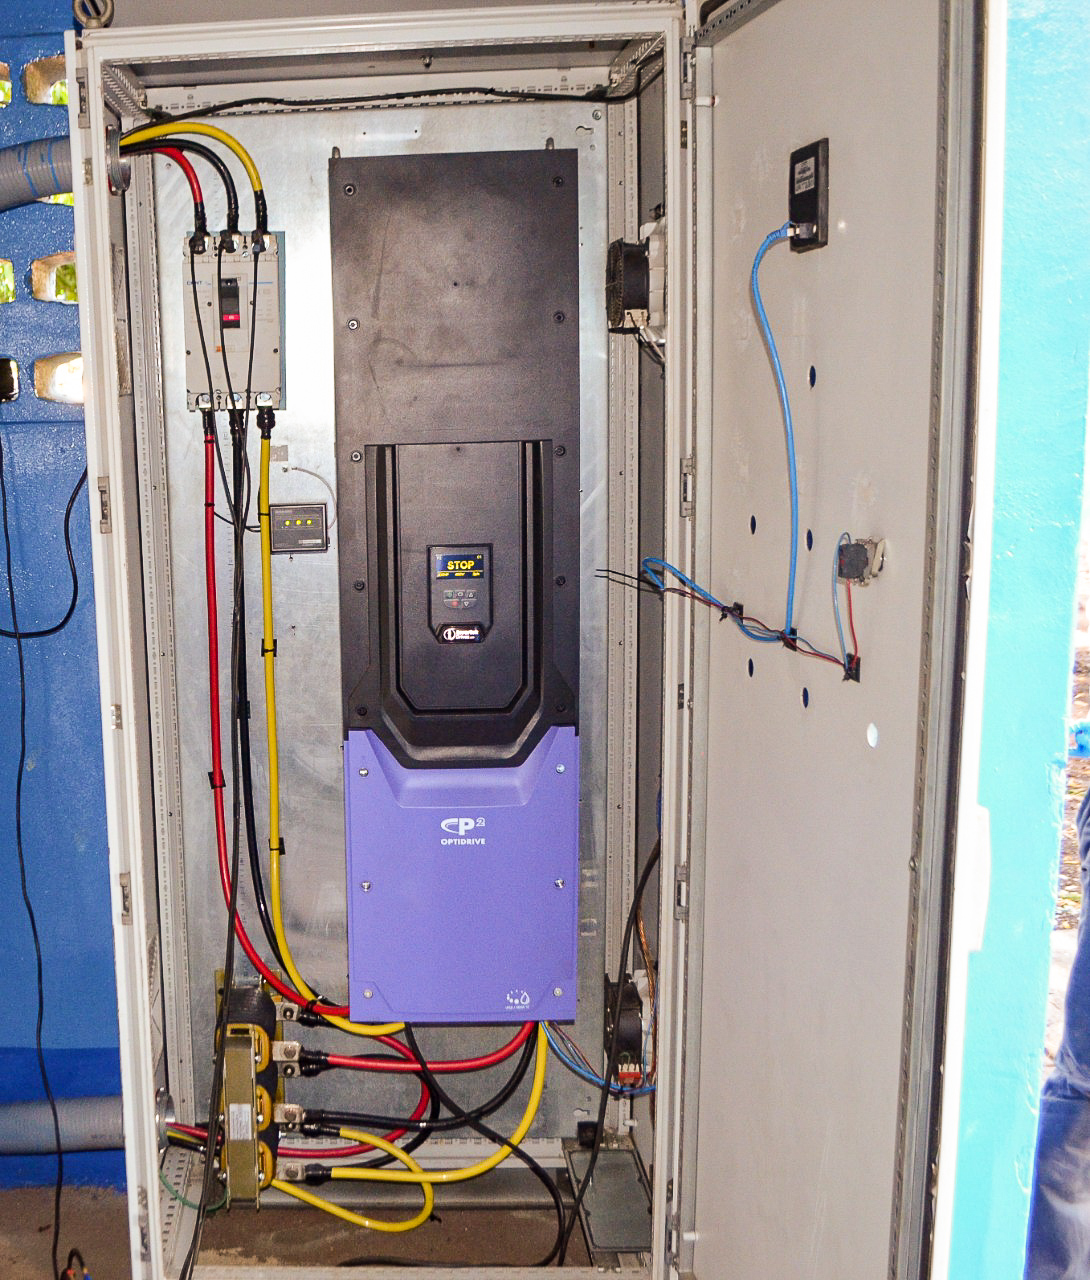 The Optidrive P2 VFD has replaced a start-stop transformer-based pump control system in Nicaragua.